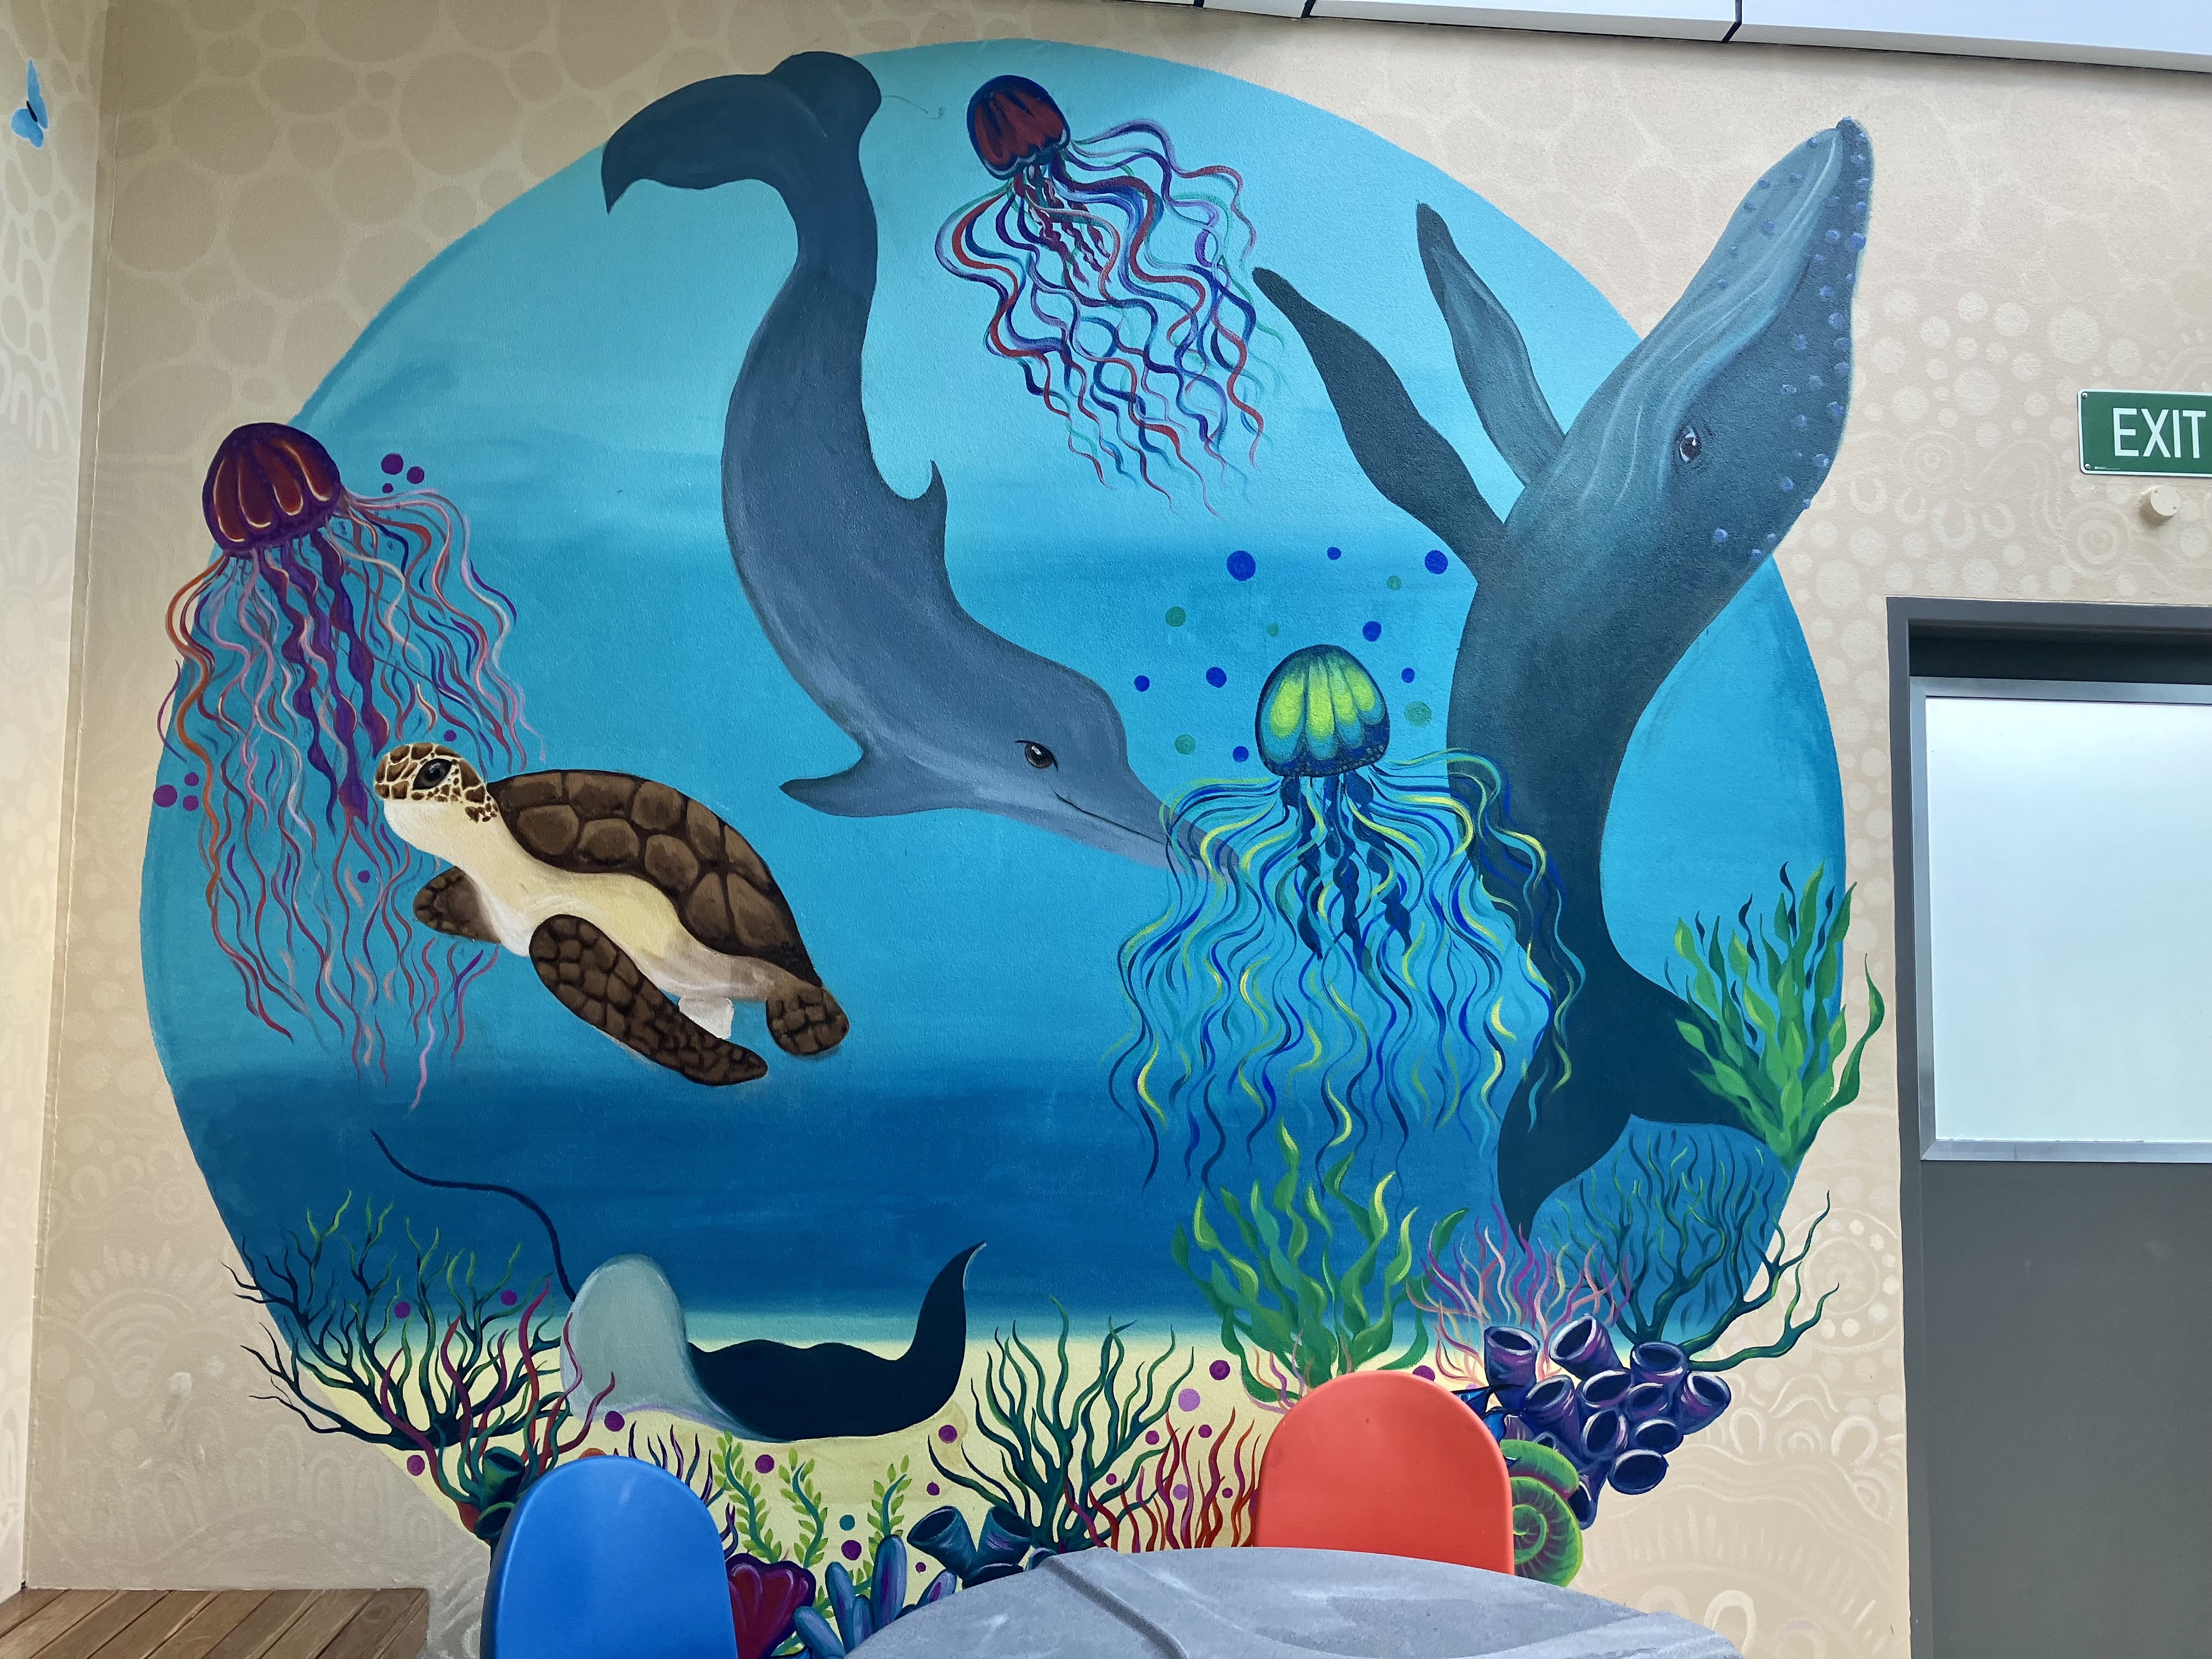 Ocean-themed mural featuring a whale and a dolphin.